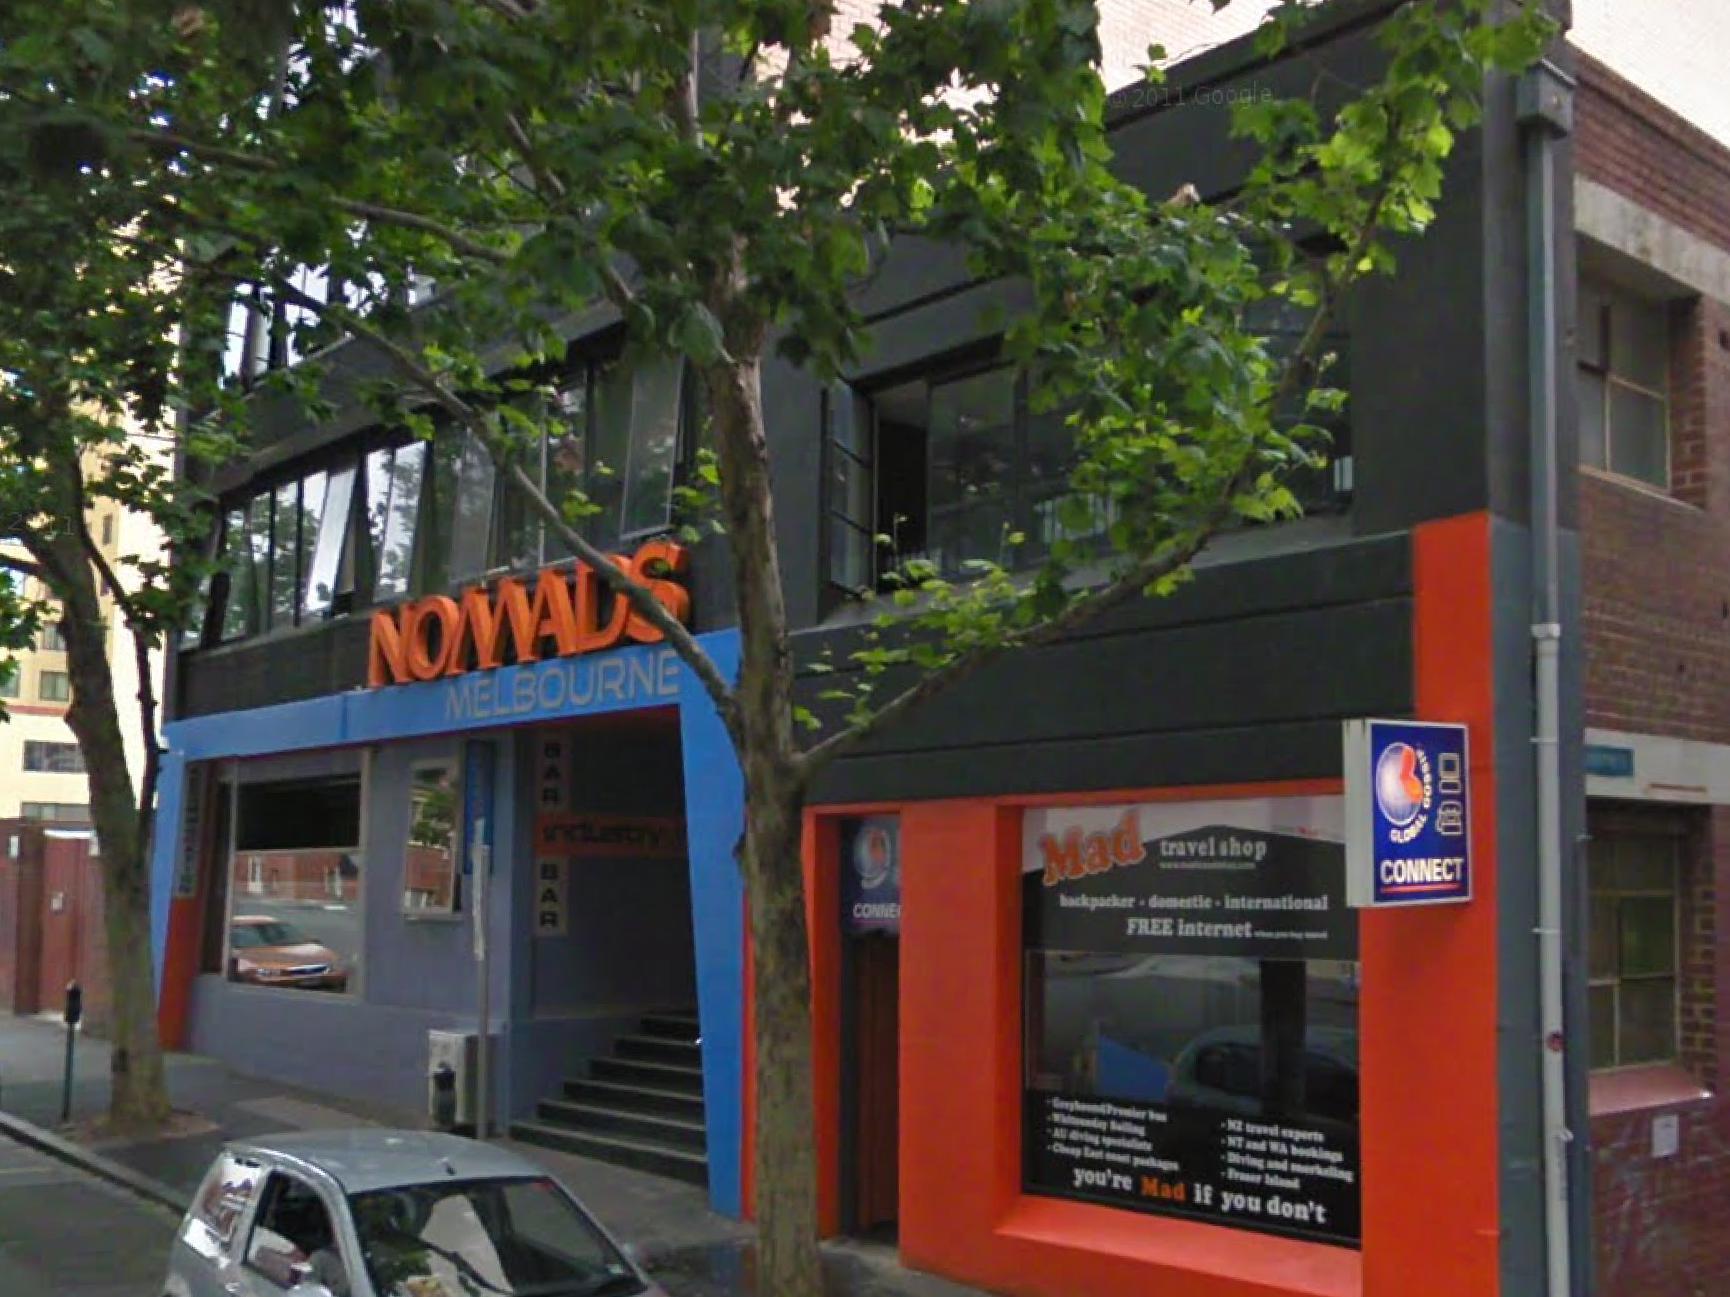 Nomads Melbourne Backpackers Melbourne FAQ 2017, What facilities are there in Nomads Melbourne Backpackers Melbourne 2017, What Languages Spoken are Supported in Nomads Melbourne Backpackers Melbourne 2017, Which payment cards are accepted in Nomads Melbourne Backpackers Melbourne , Melbourne Nomads Melbourne Backpackers room facilities and services Q&A 2017, Melbourne Nomads Melbourne Backpackers online booking services 2017, Melbourne Nomads Melbourne Backpackers address 2017, Melbourne Nomads Melbourne Backpackers telephone number 2017,Melbourne Nomads Melbourne Backpackers map 2017, Melbourne Nomads Melbourne Backpackers traffic guide 2017, how to go Melbourne Nomads Melbourne Backpackers, Melbourne Nomads Melbourne Backpackers booking online 2017, Melbourne Nomads Melbourne Backpackers room types 2017.